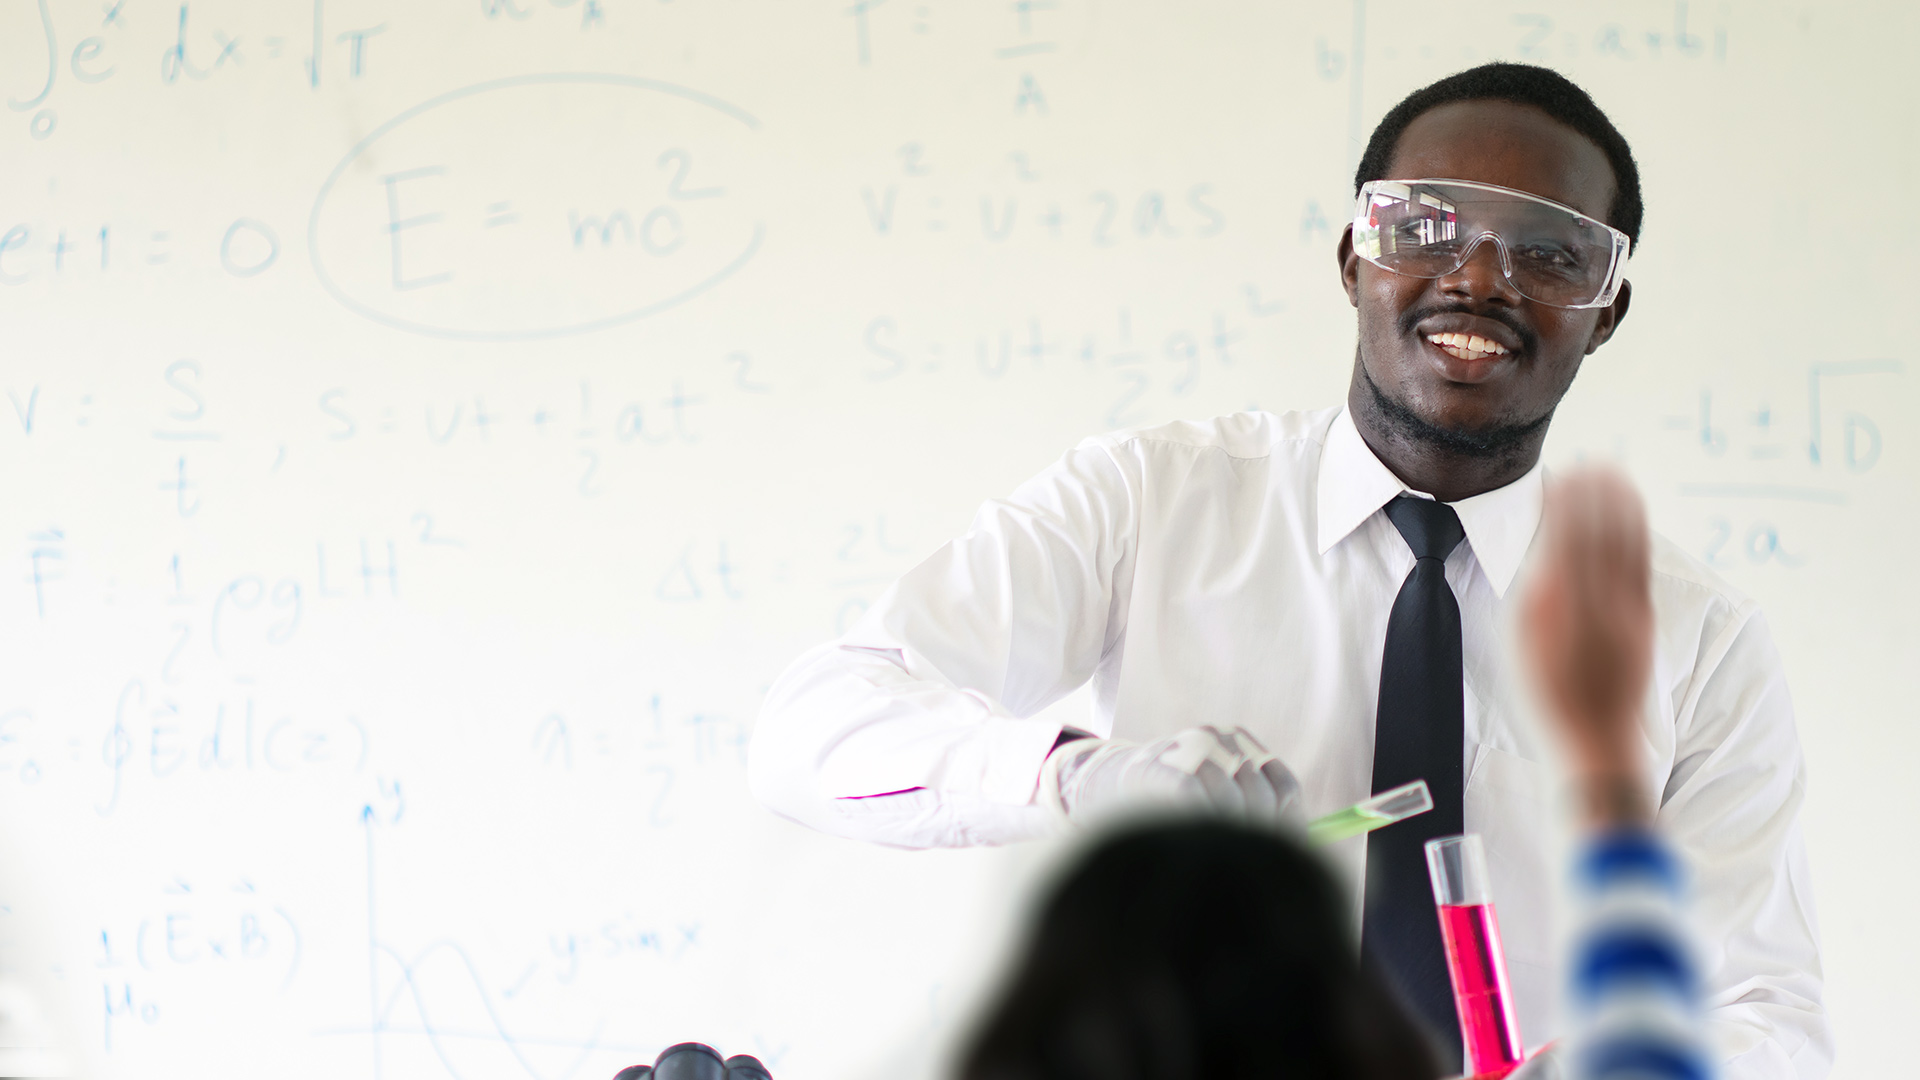 Teacher candidates in STEM fields can apply for Noyce scholarships, funded internships